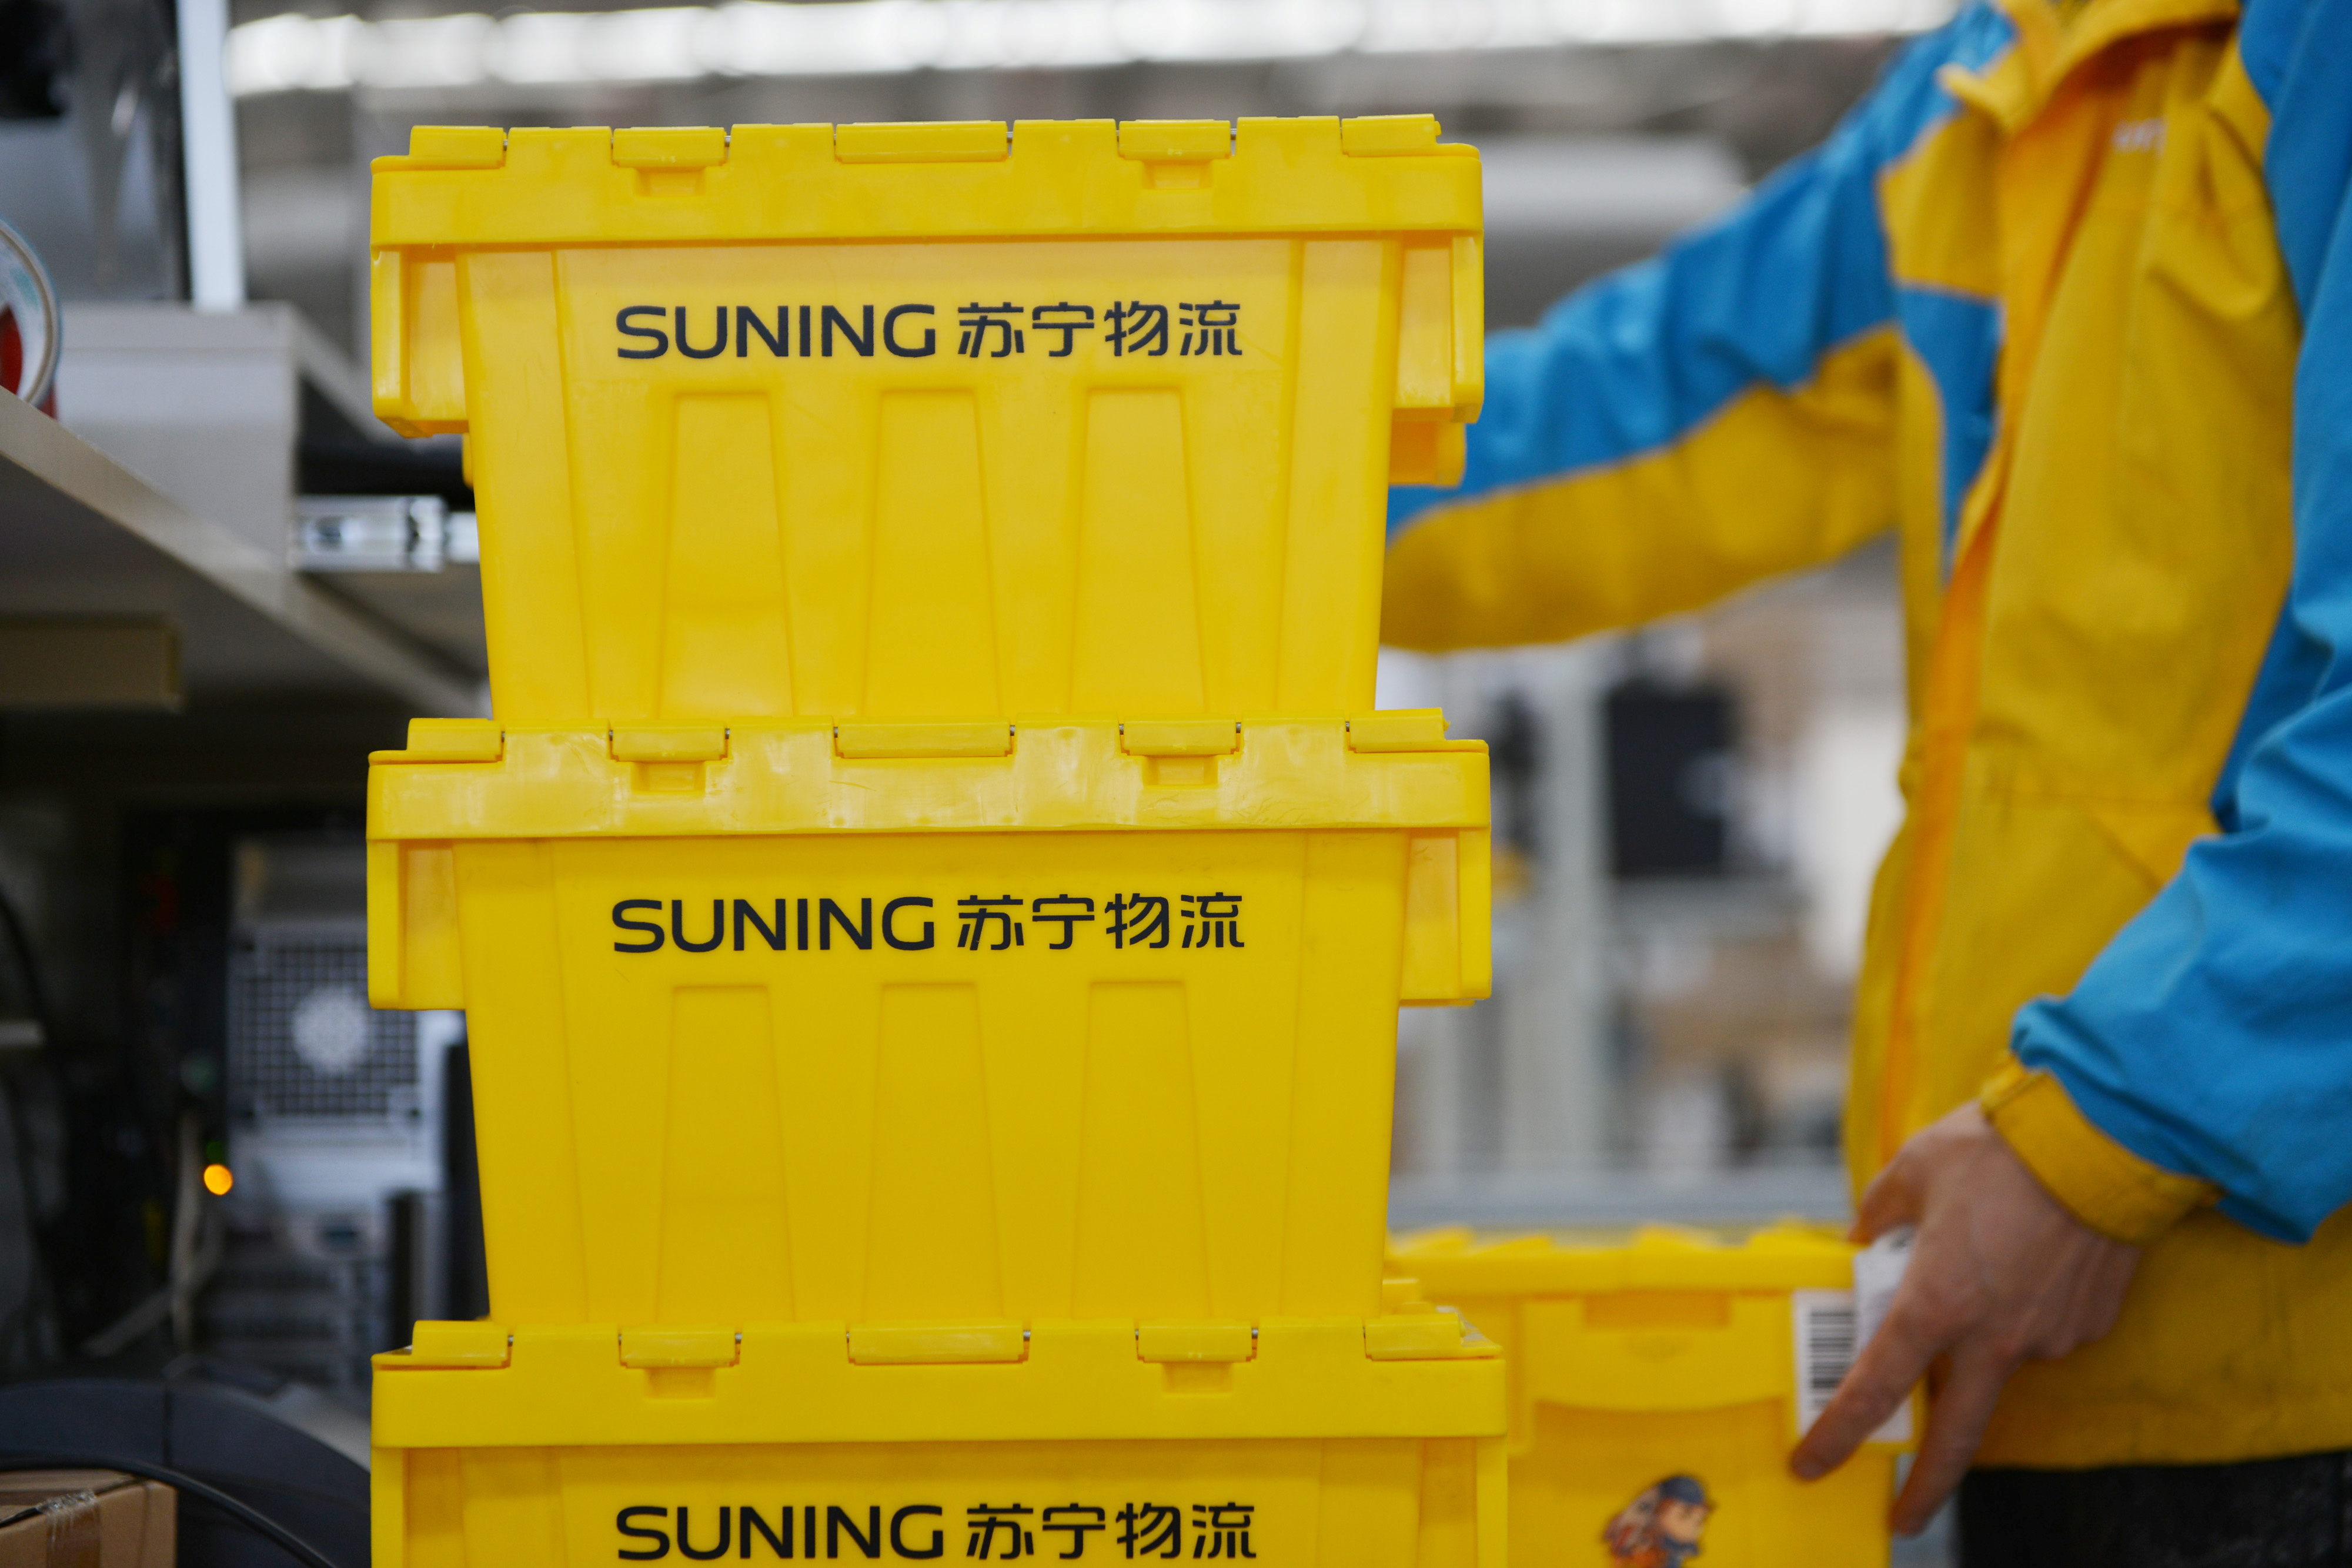 An employee of Suning piles up reusable boxes to be delivered at a logistics center ahead of the Singles Day online shopping festival in Nanjing